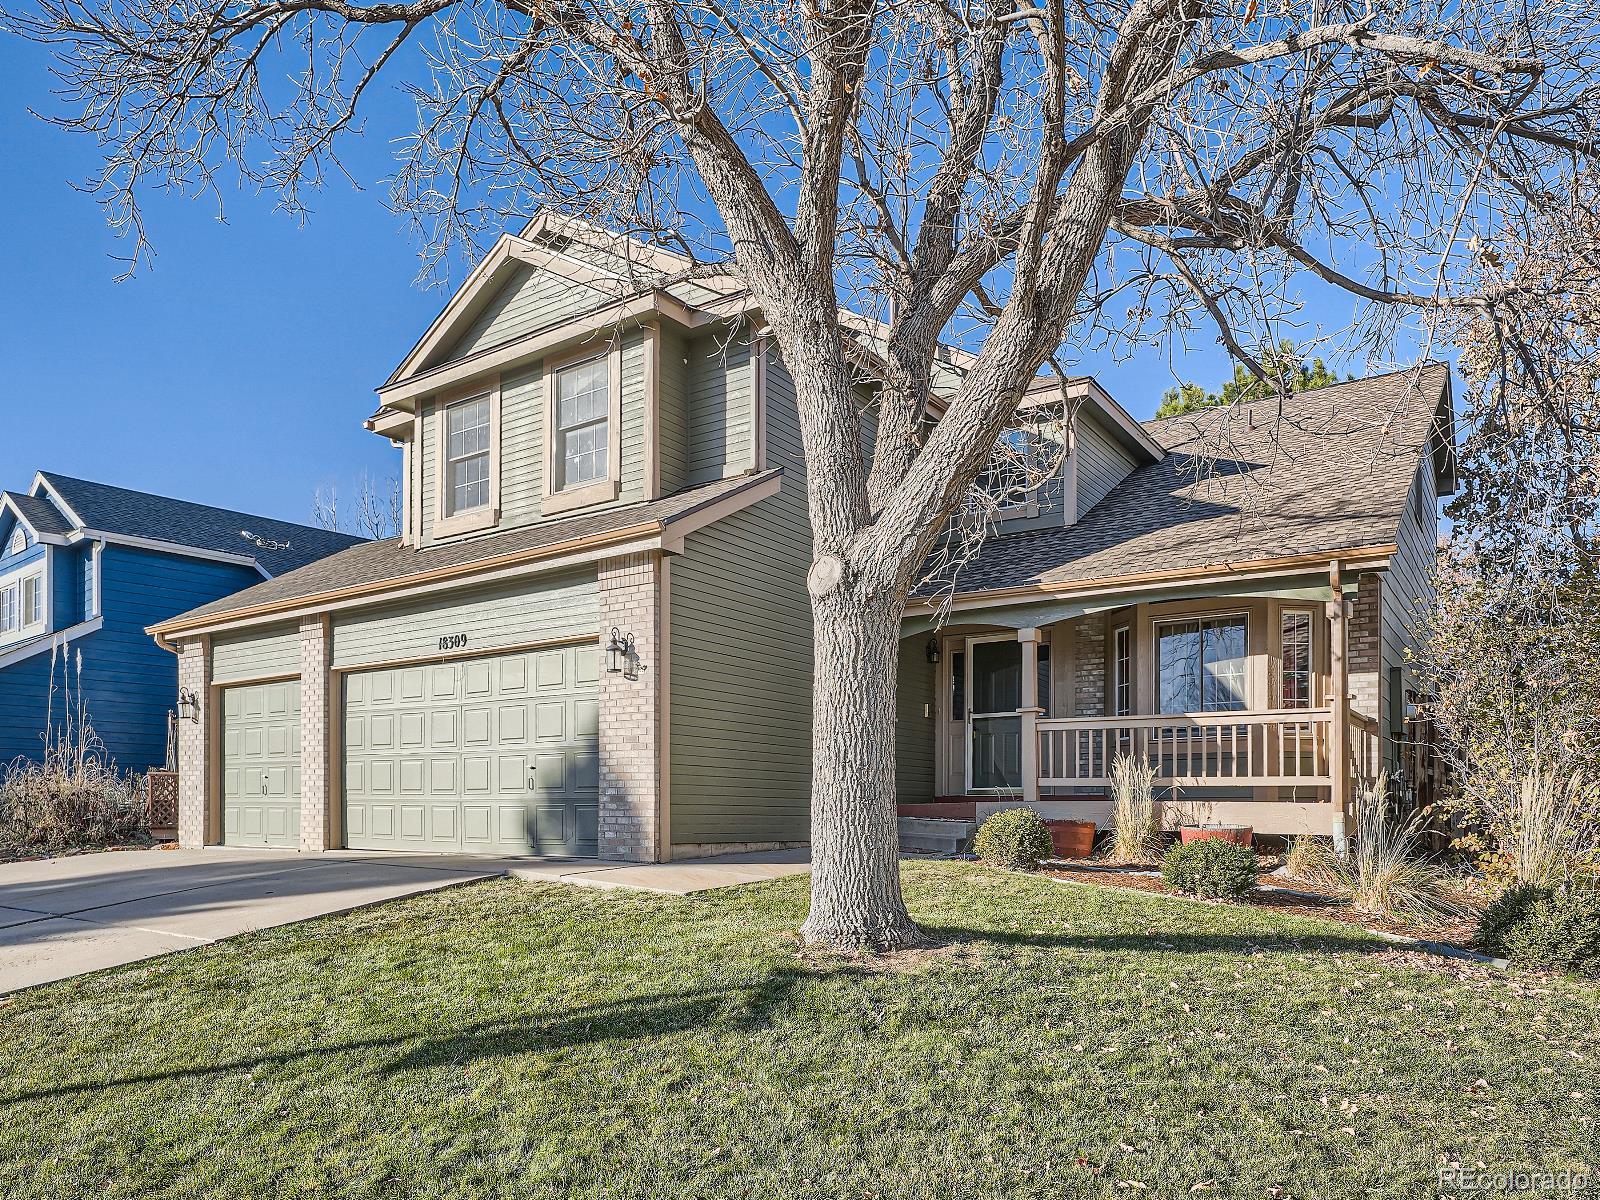 18309 e baker place, aurora sold home. Closed on 2024-01-16 for $550,000.